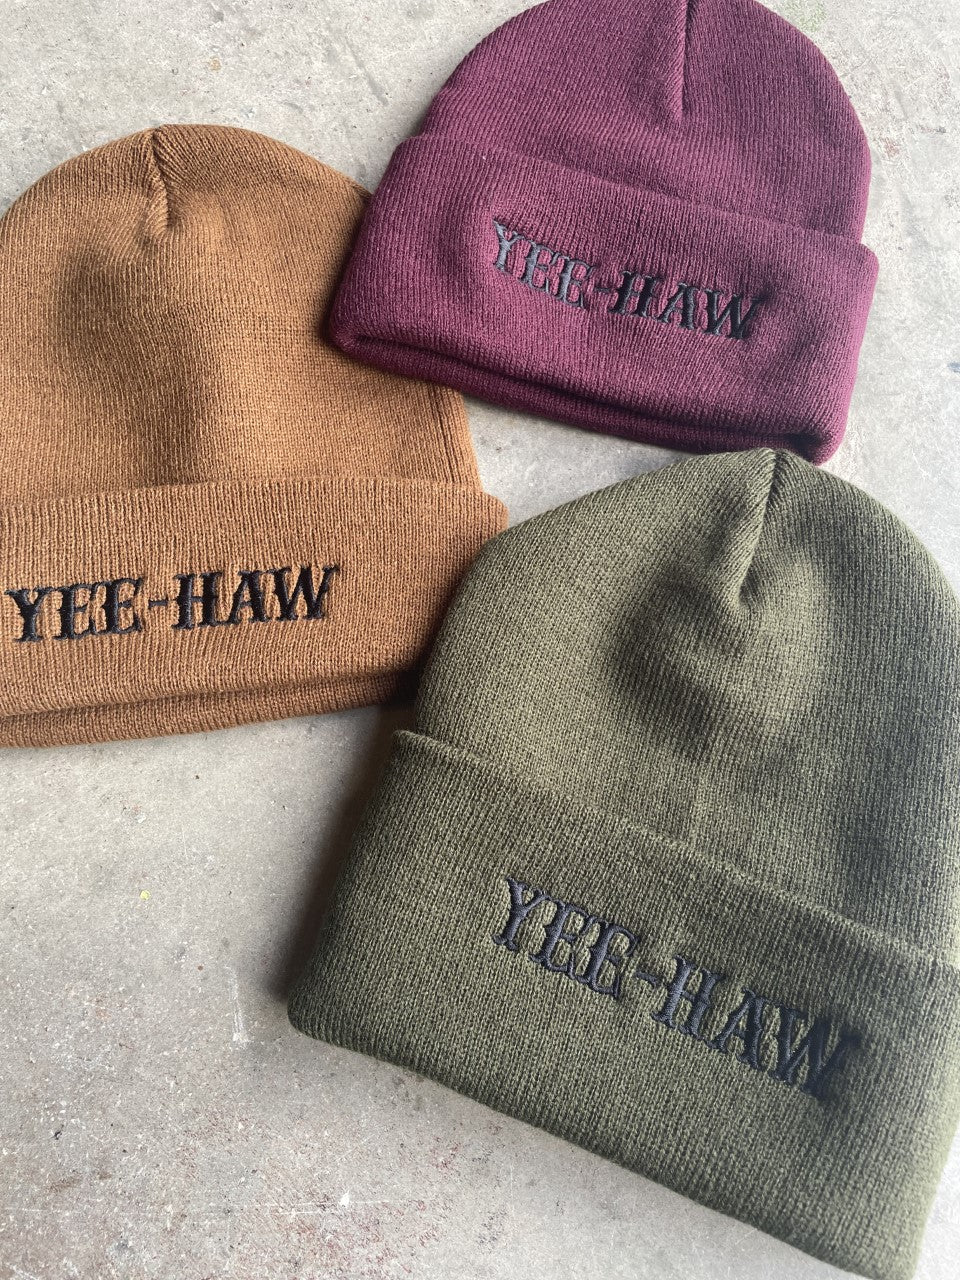 Yeehaw Knit Embroidered BeanieCaramelOS